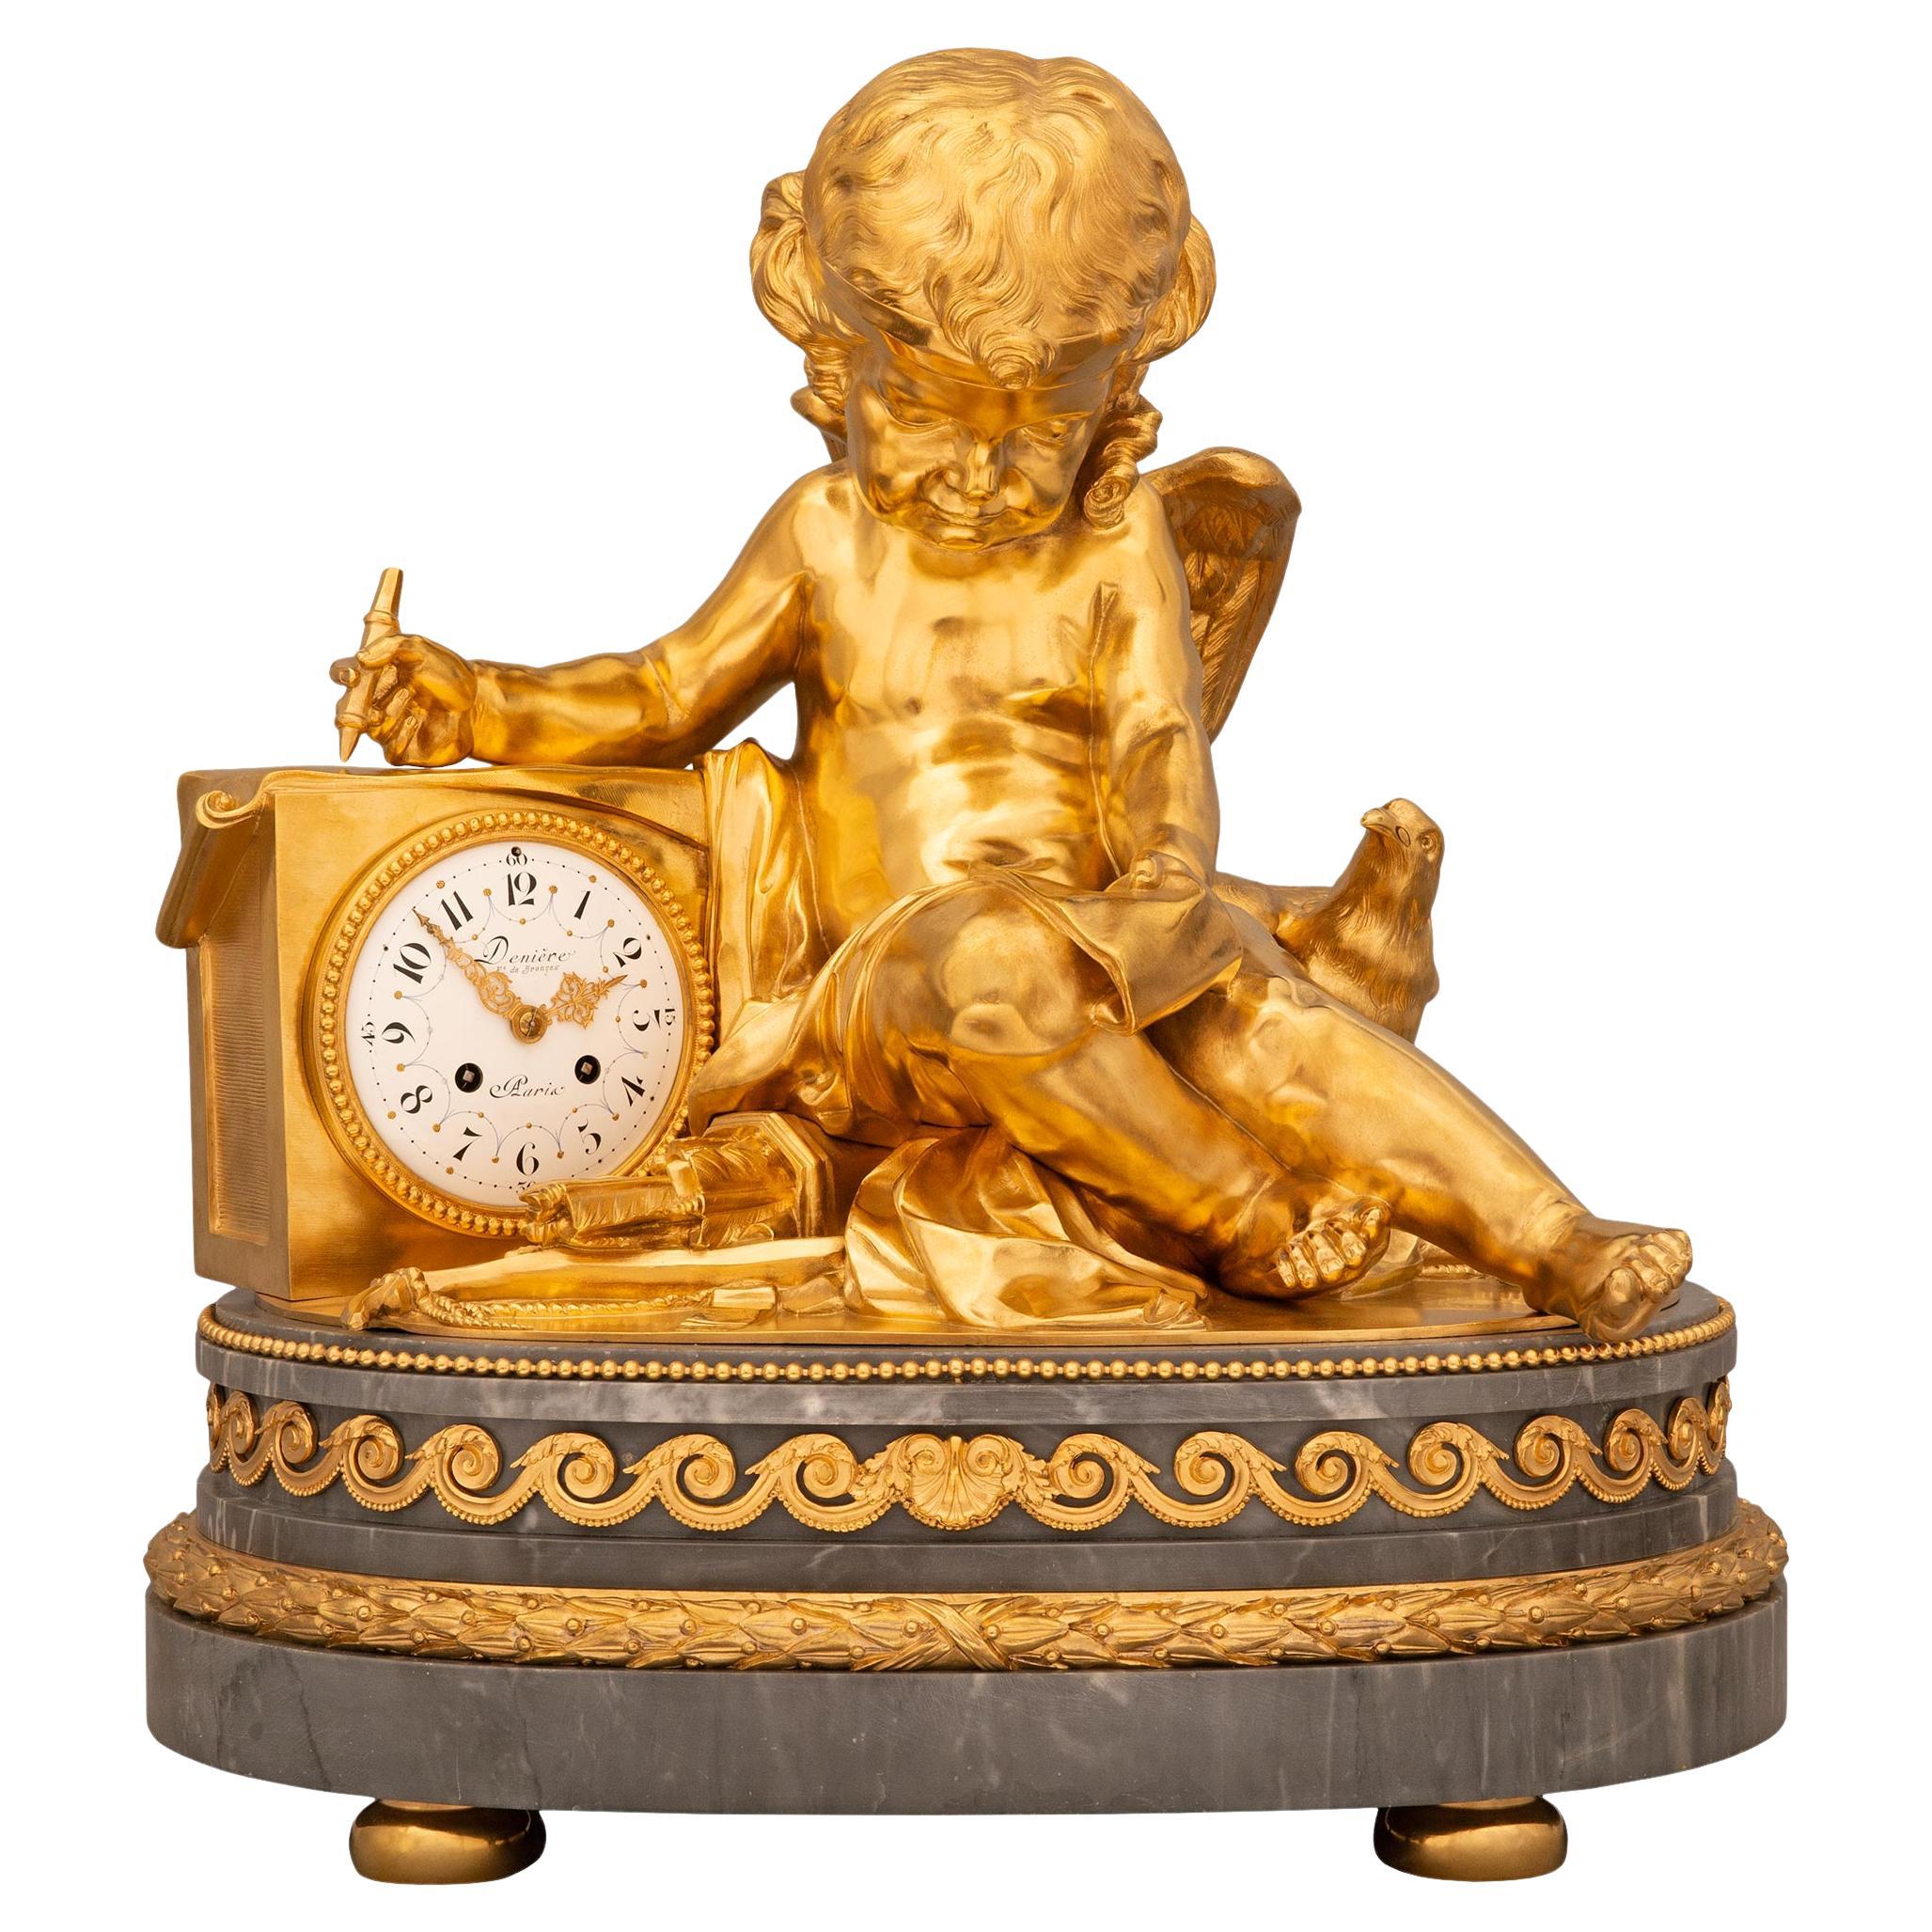 French 19th century Louis XVI st. marble and Ormolu clock, signed Derniere